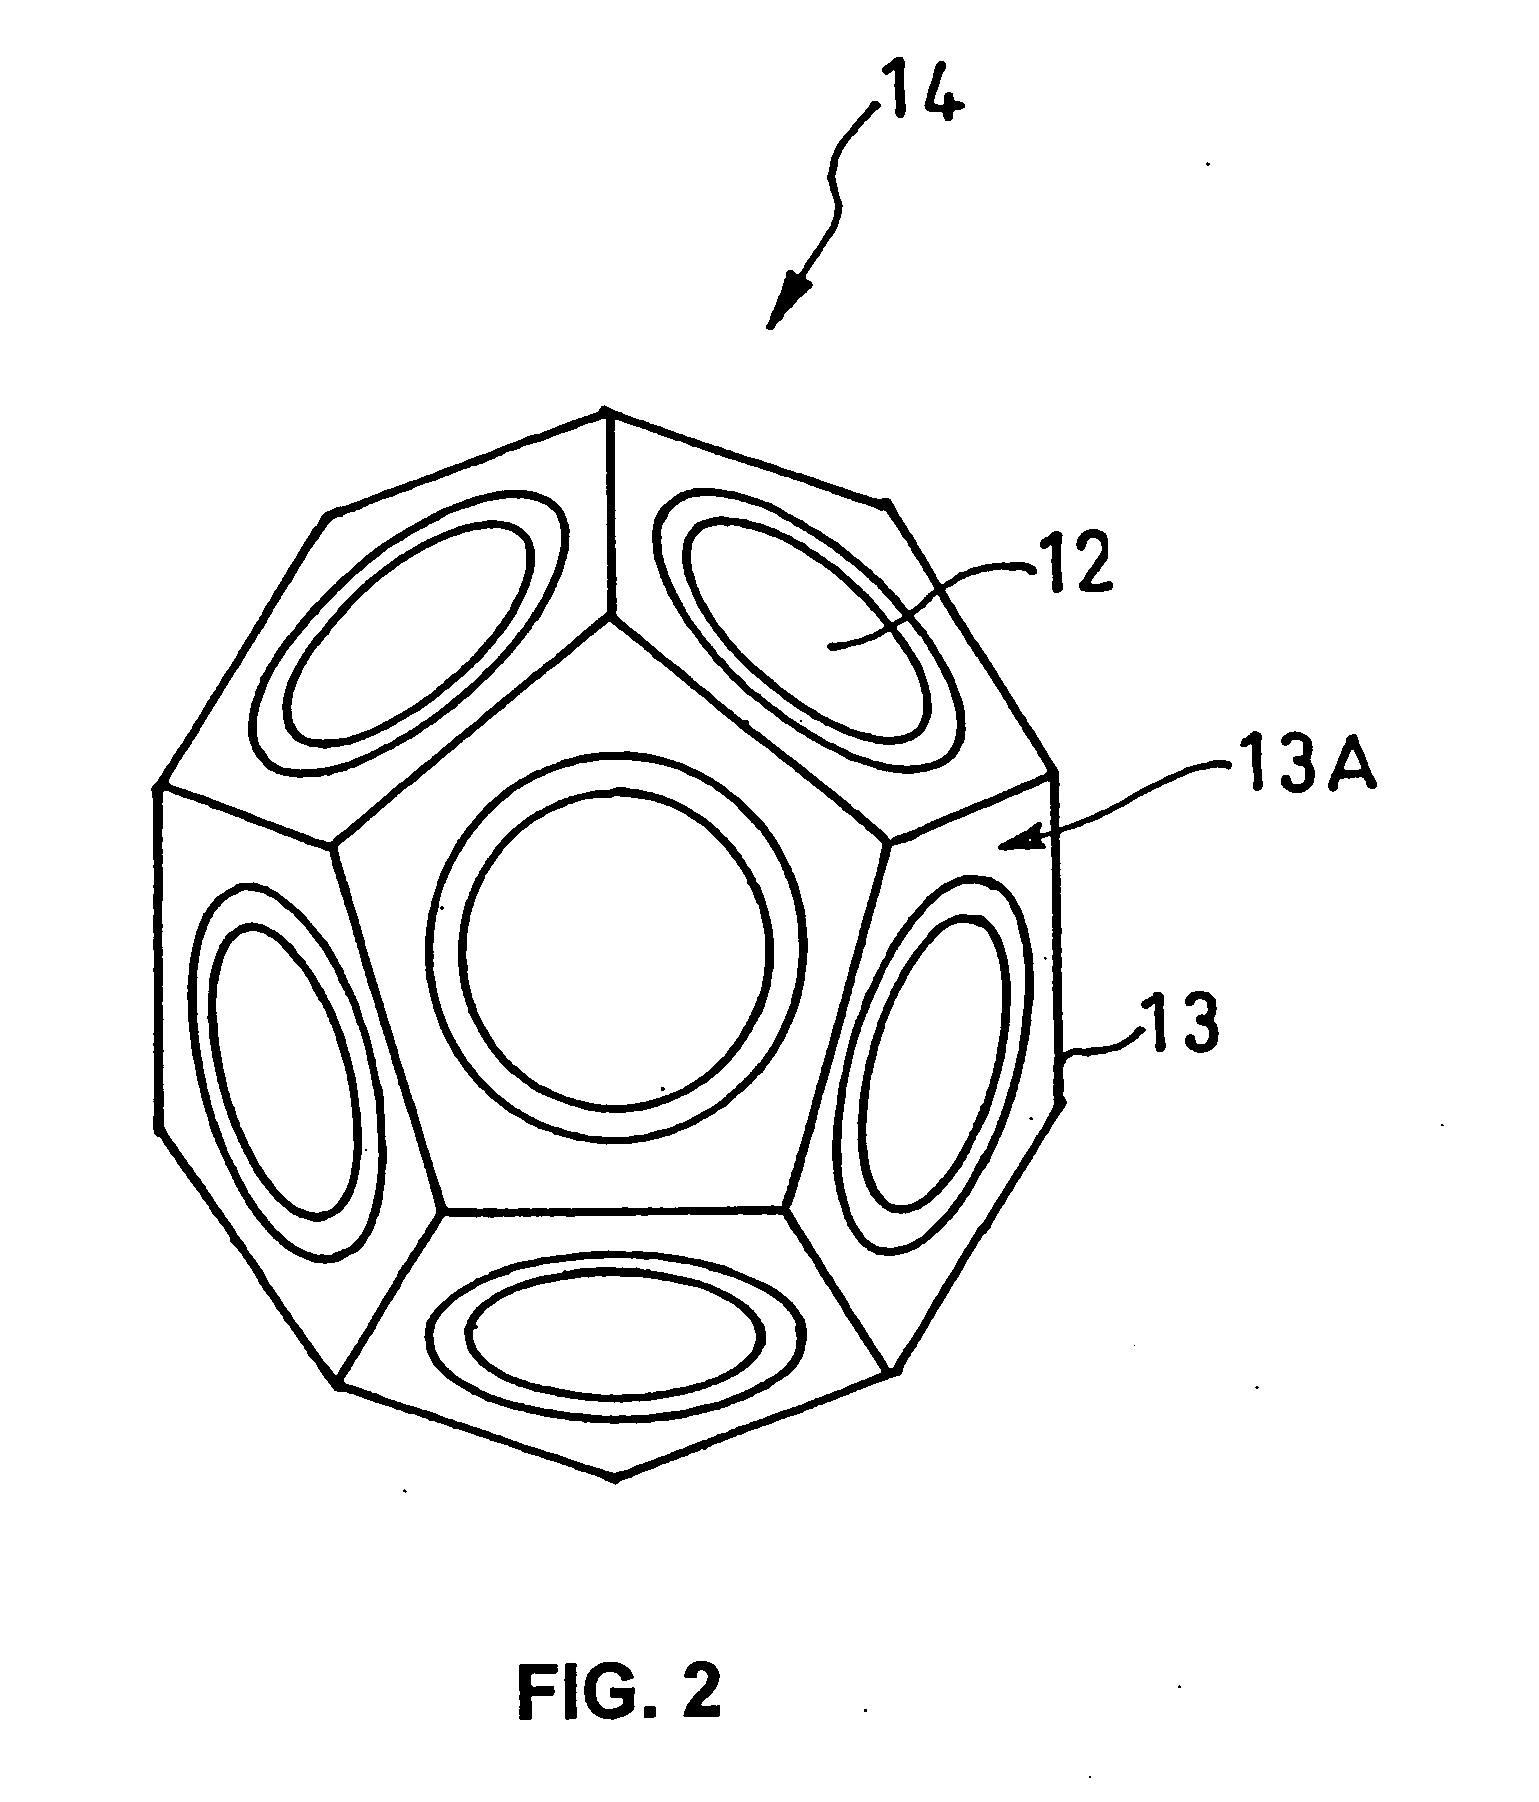 Dodecahedral speaker system